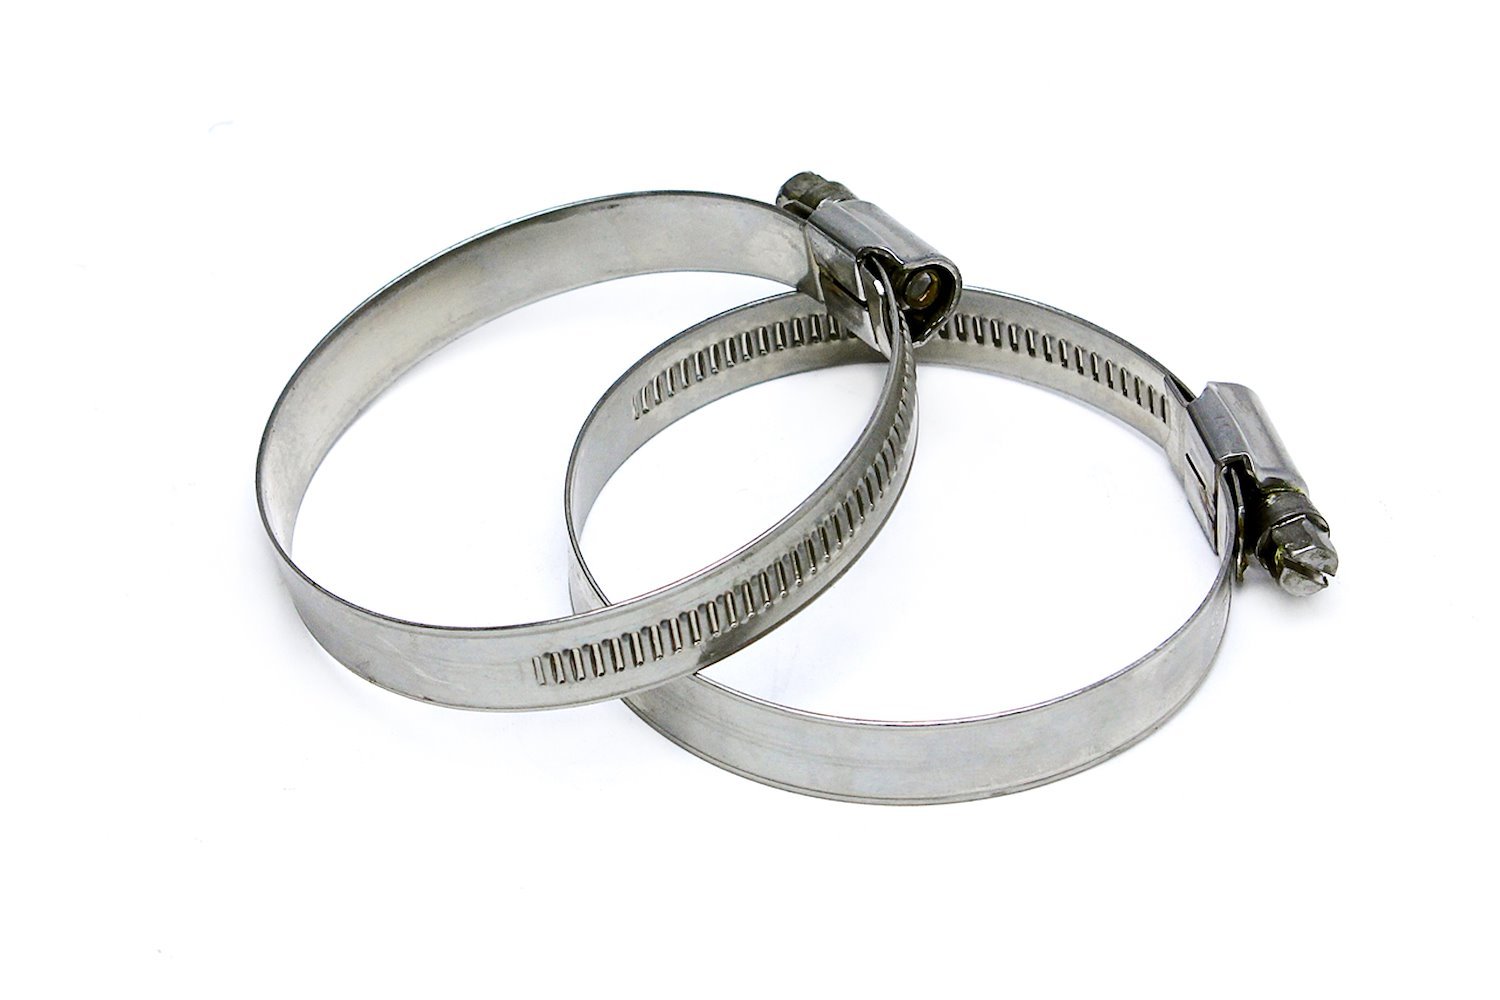 EMSC-60-80x2 Embossed Hose Clamp, Stainless Steel Embossed Hose Clamp, Size #44, Effective Range: 2-3/8 in.- 3-1/8 in., 2Pc